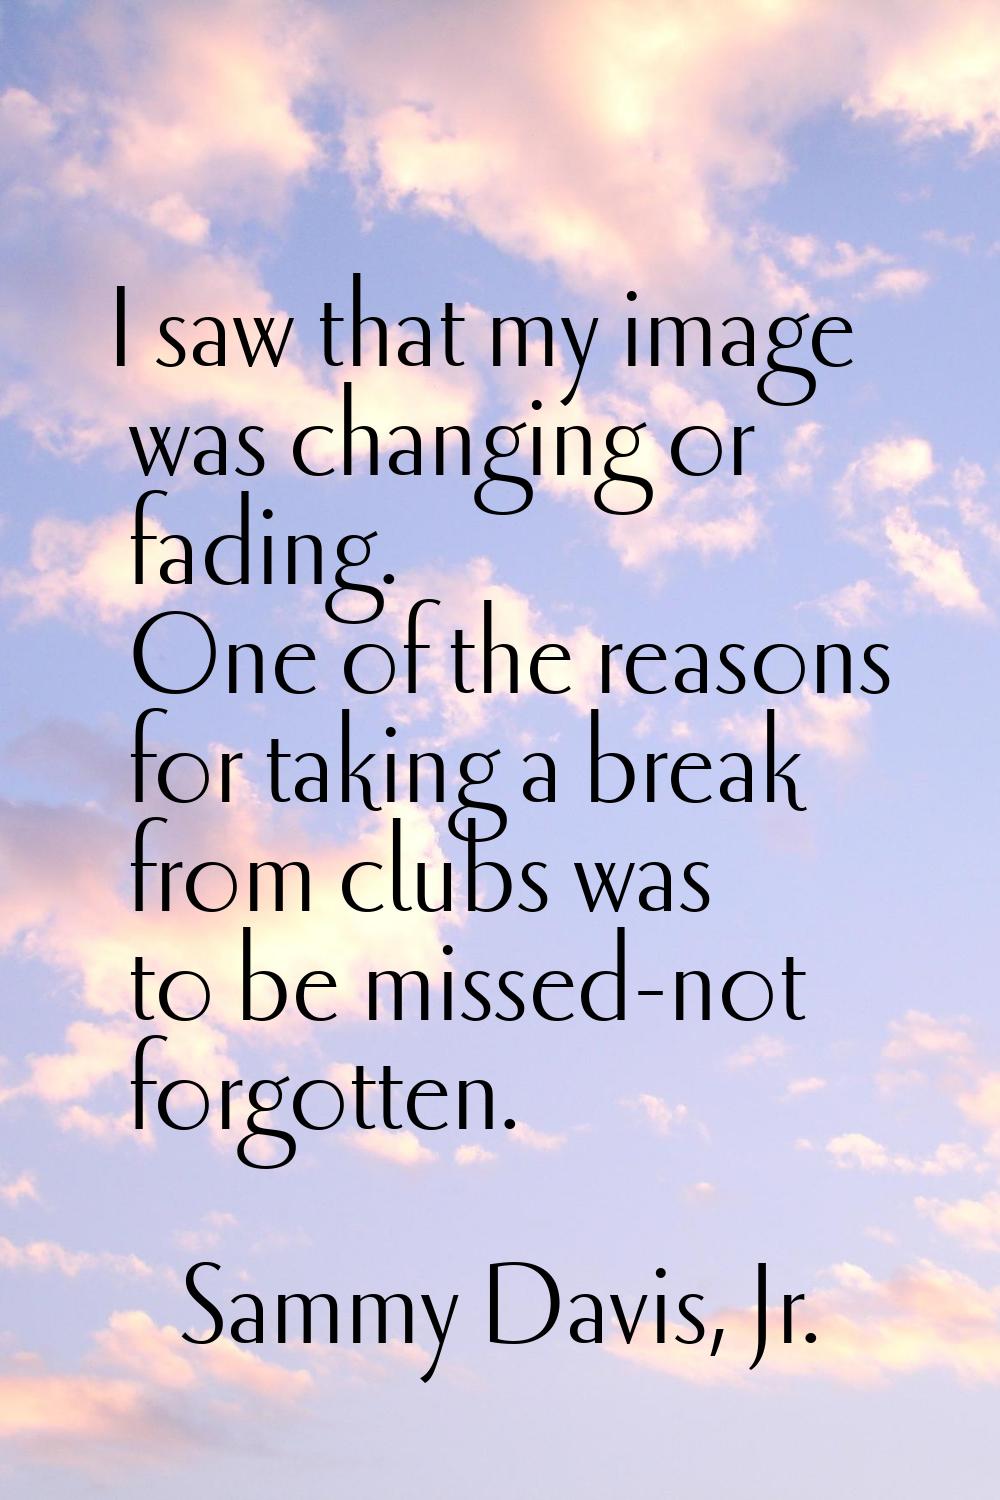 I saw that my image was changing or fading. One of the reasons for taking a break from clubs was to